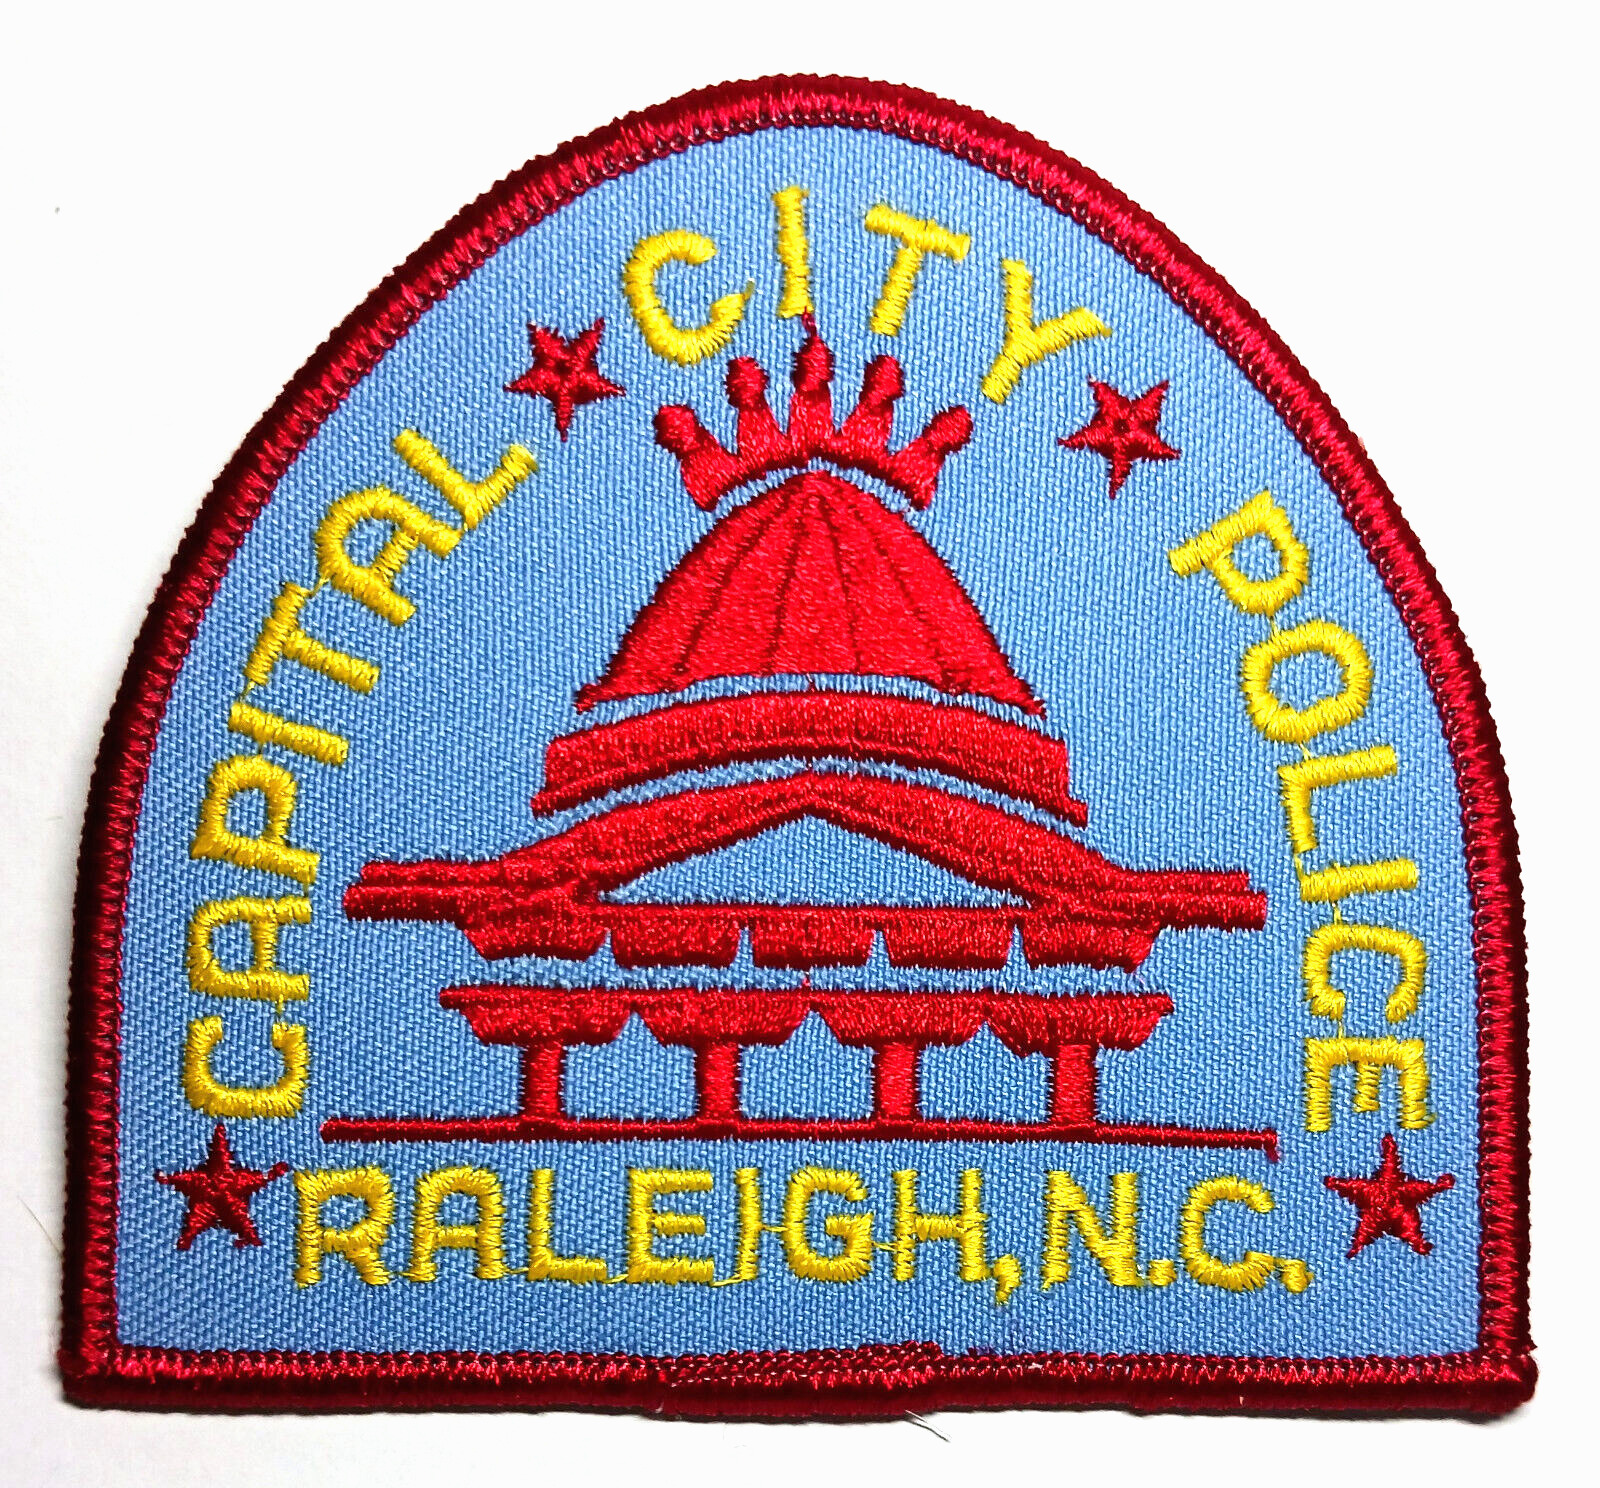 Raleigh North Carolina Police Patch - FREE Tracked US Shipping 